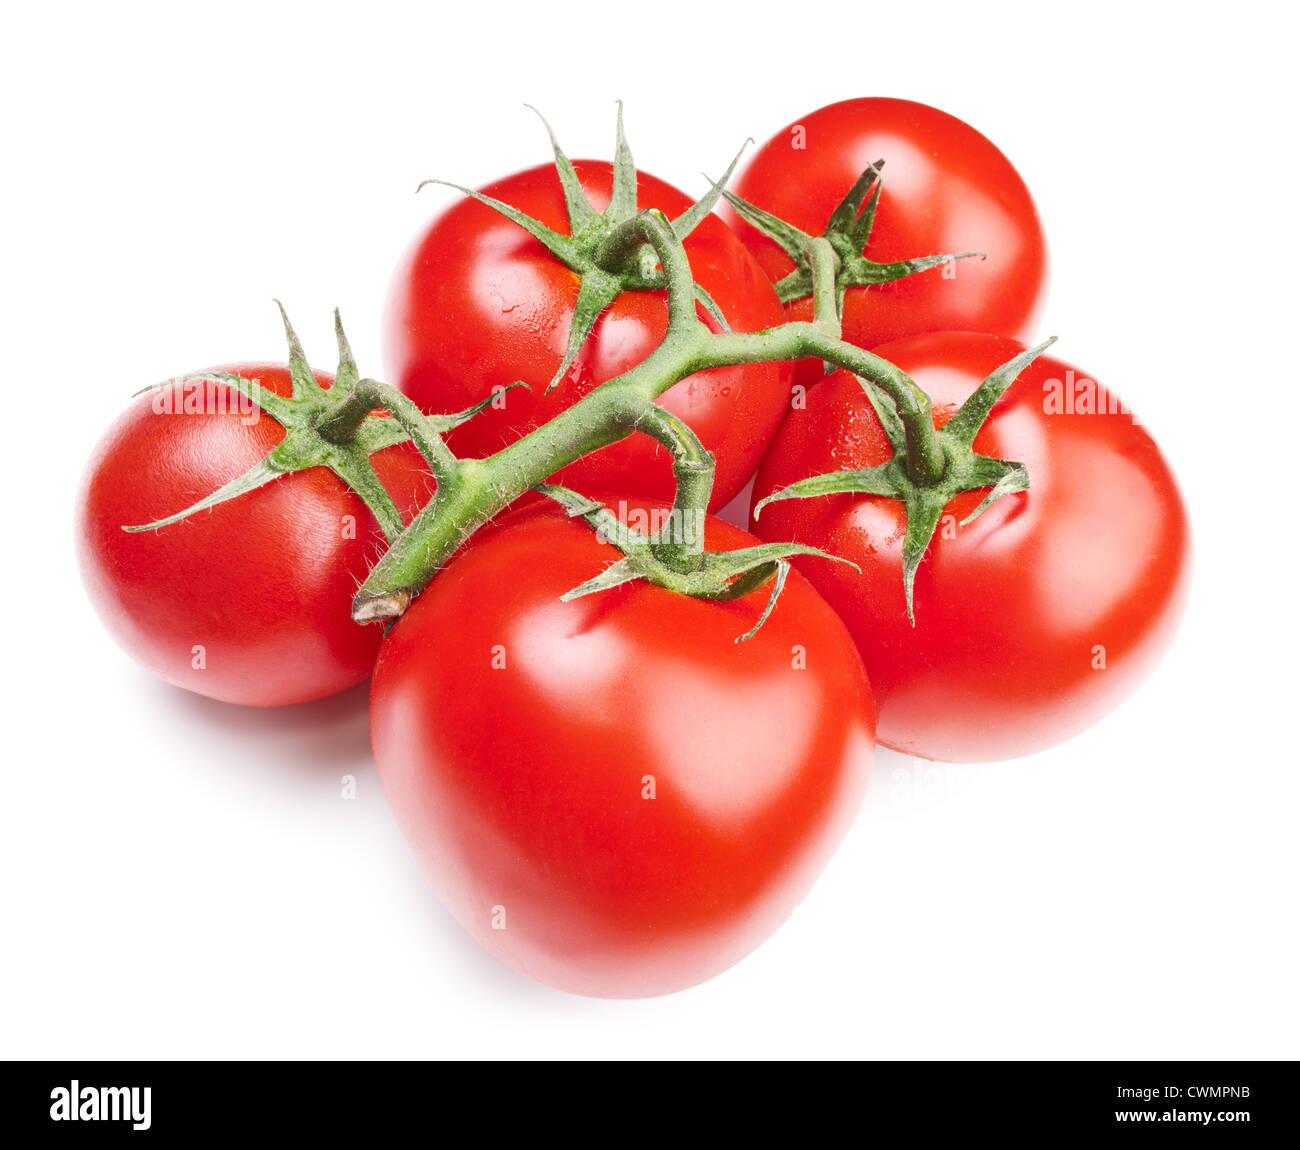 red tomato vegetable isolated on white background Stock Photo